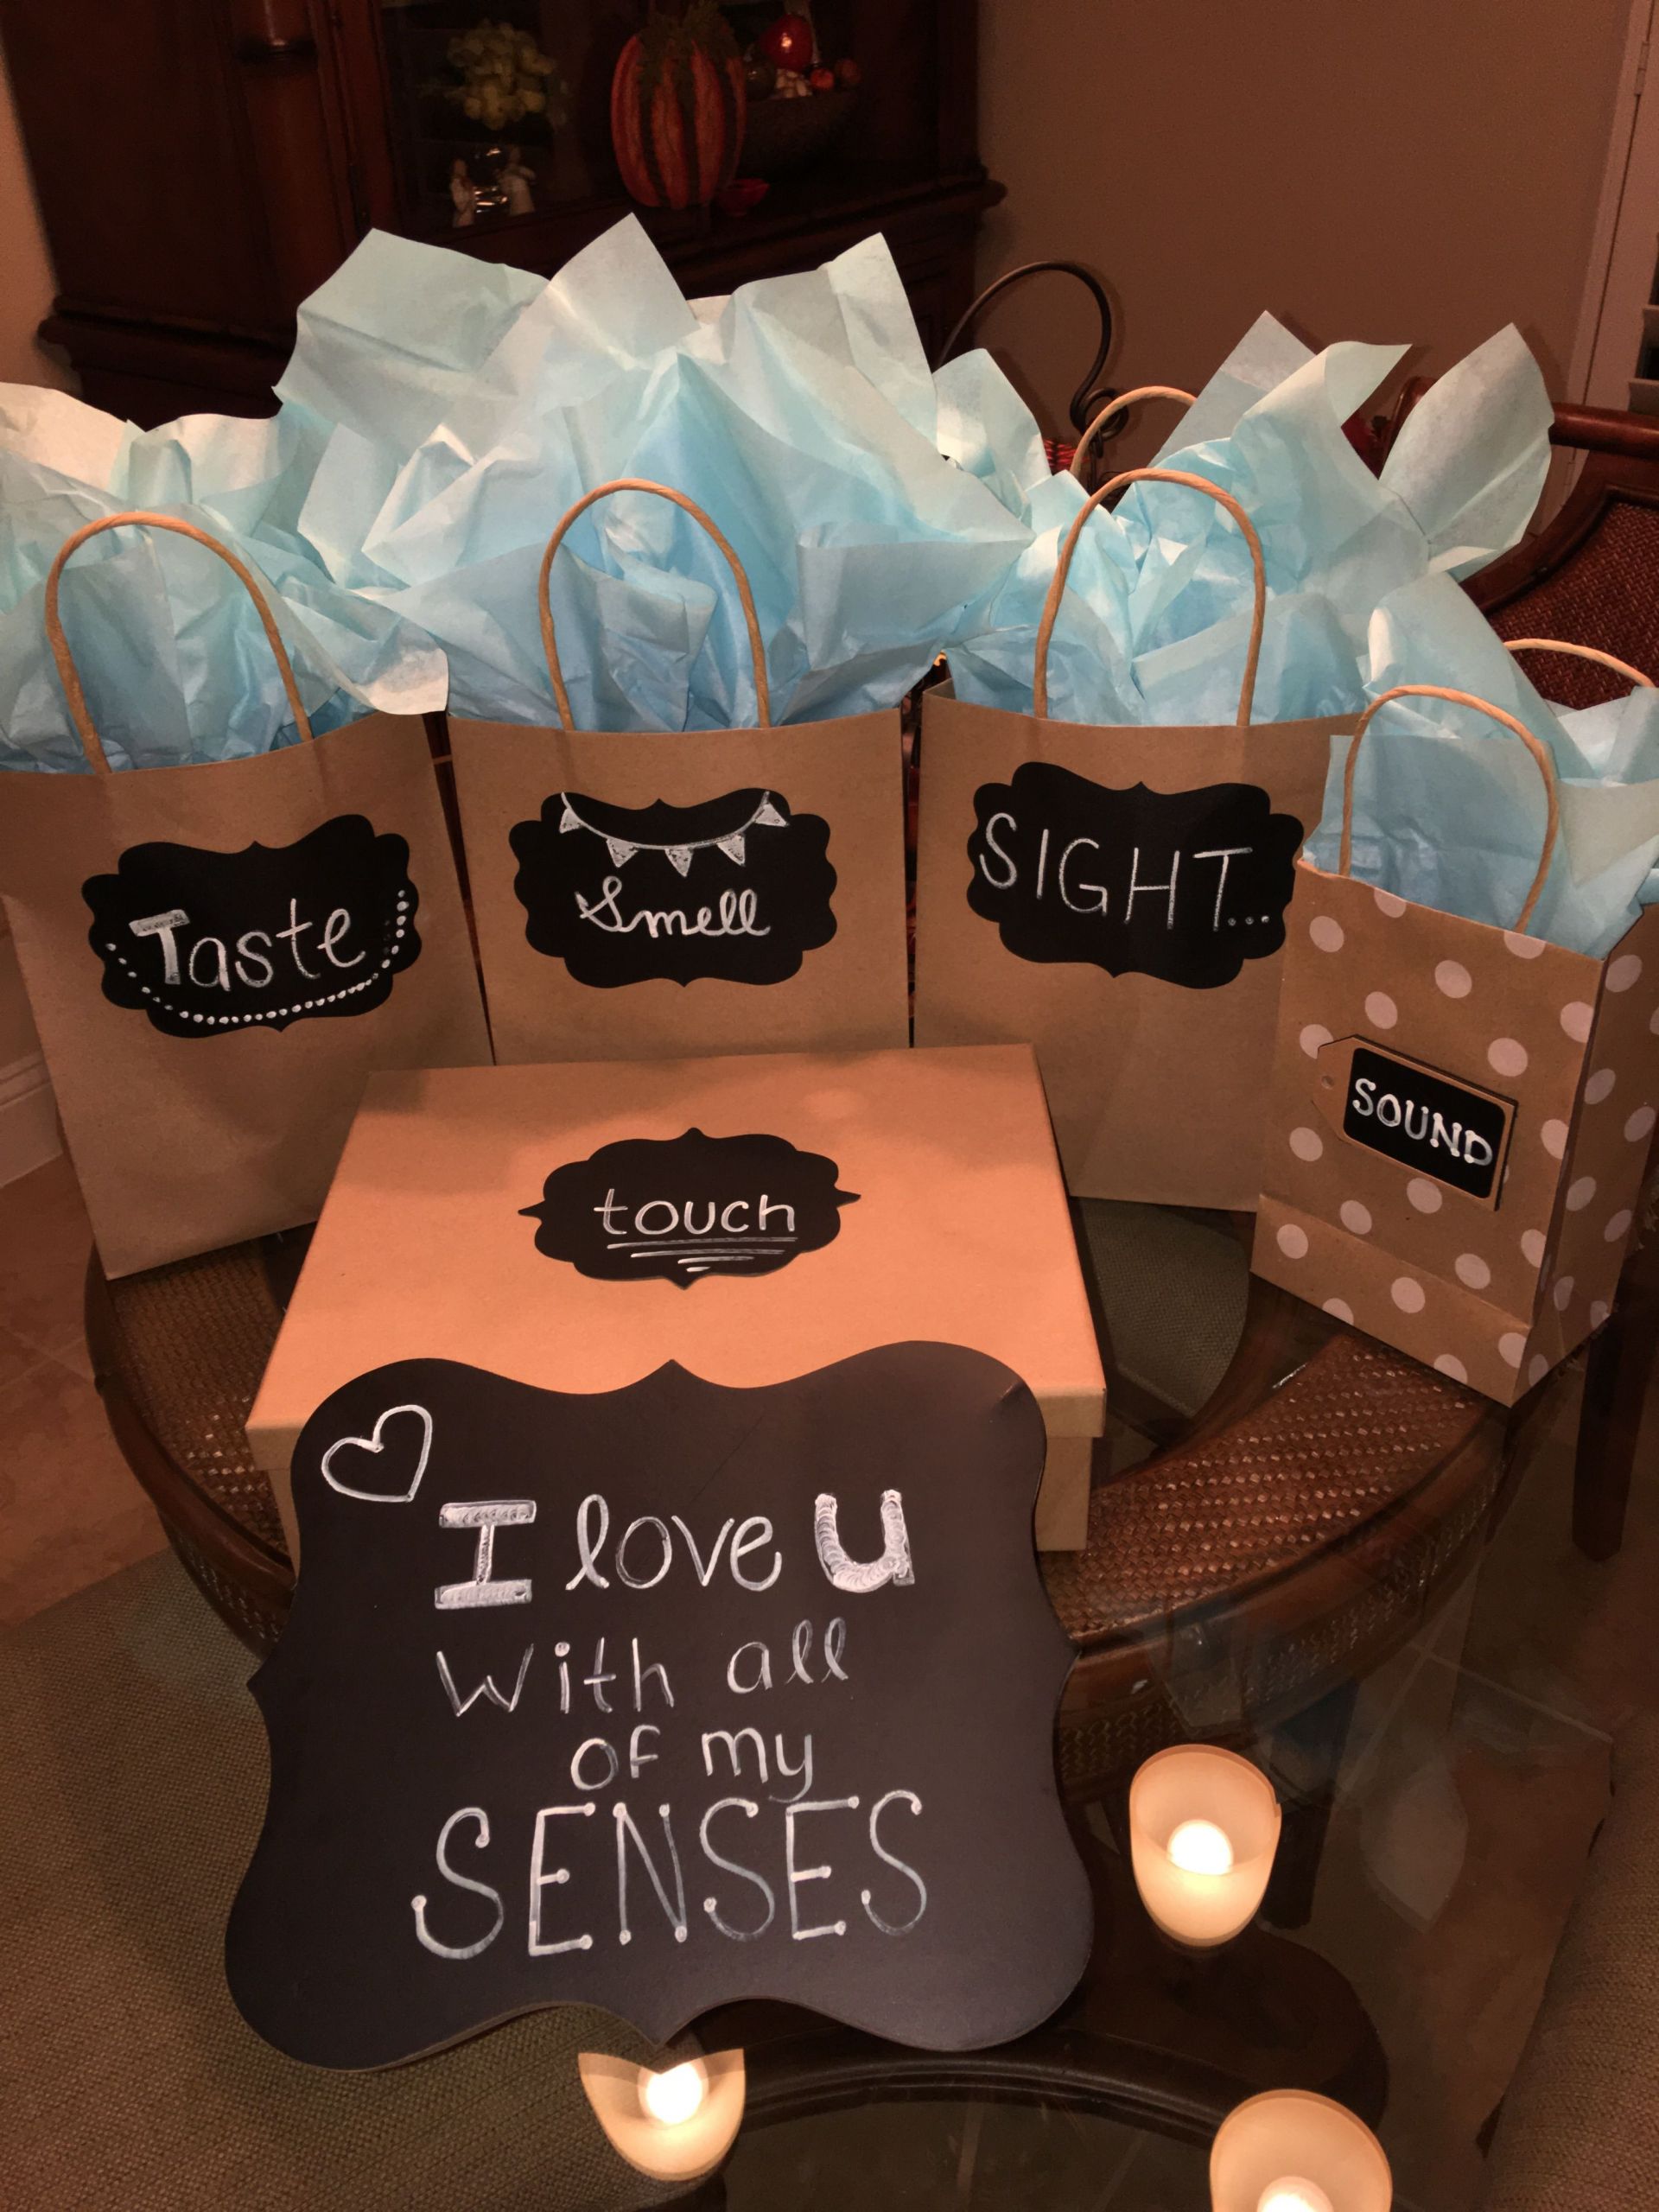 Romantic Birthday Gift Ideas Boyfriend
 I love you with all of my senses my version for my